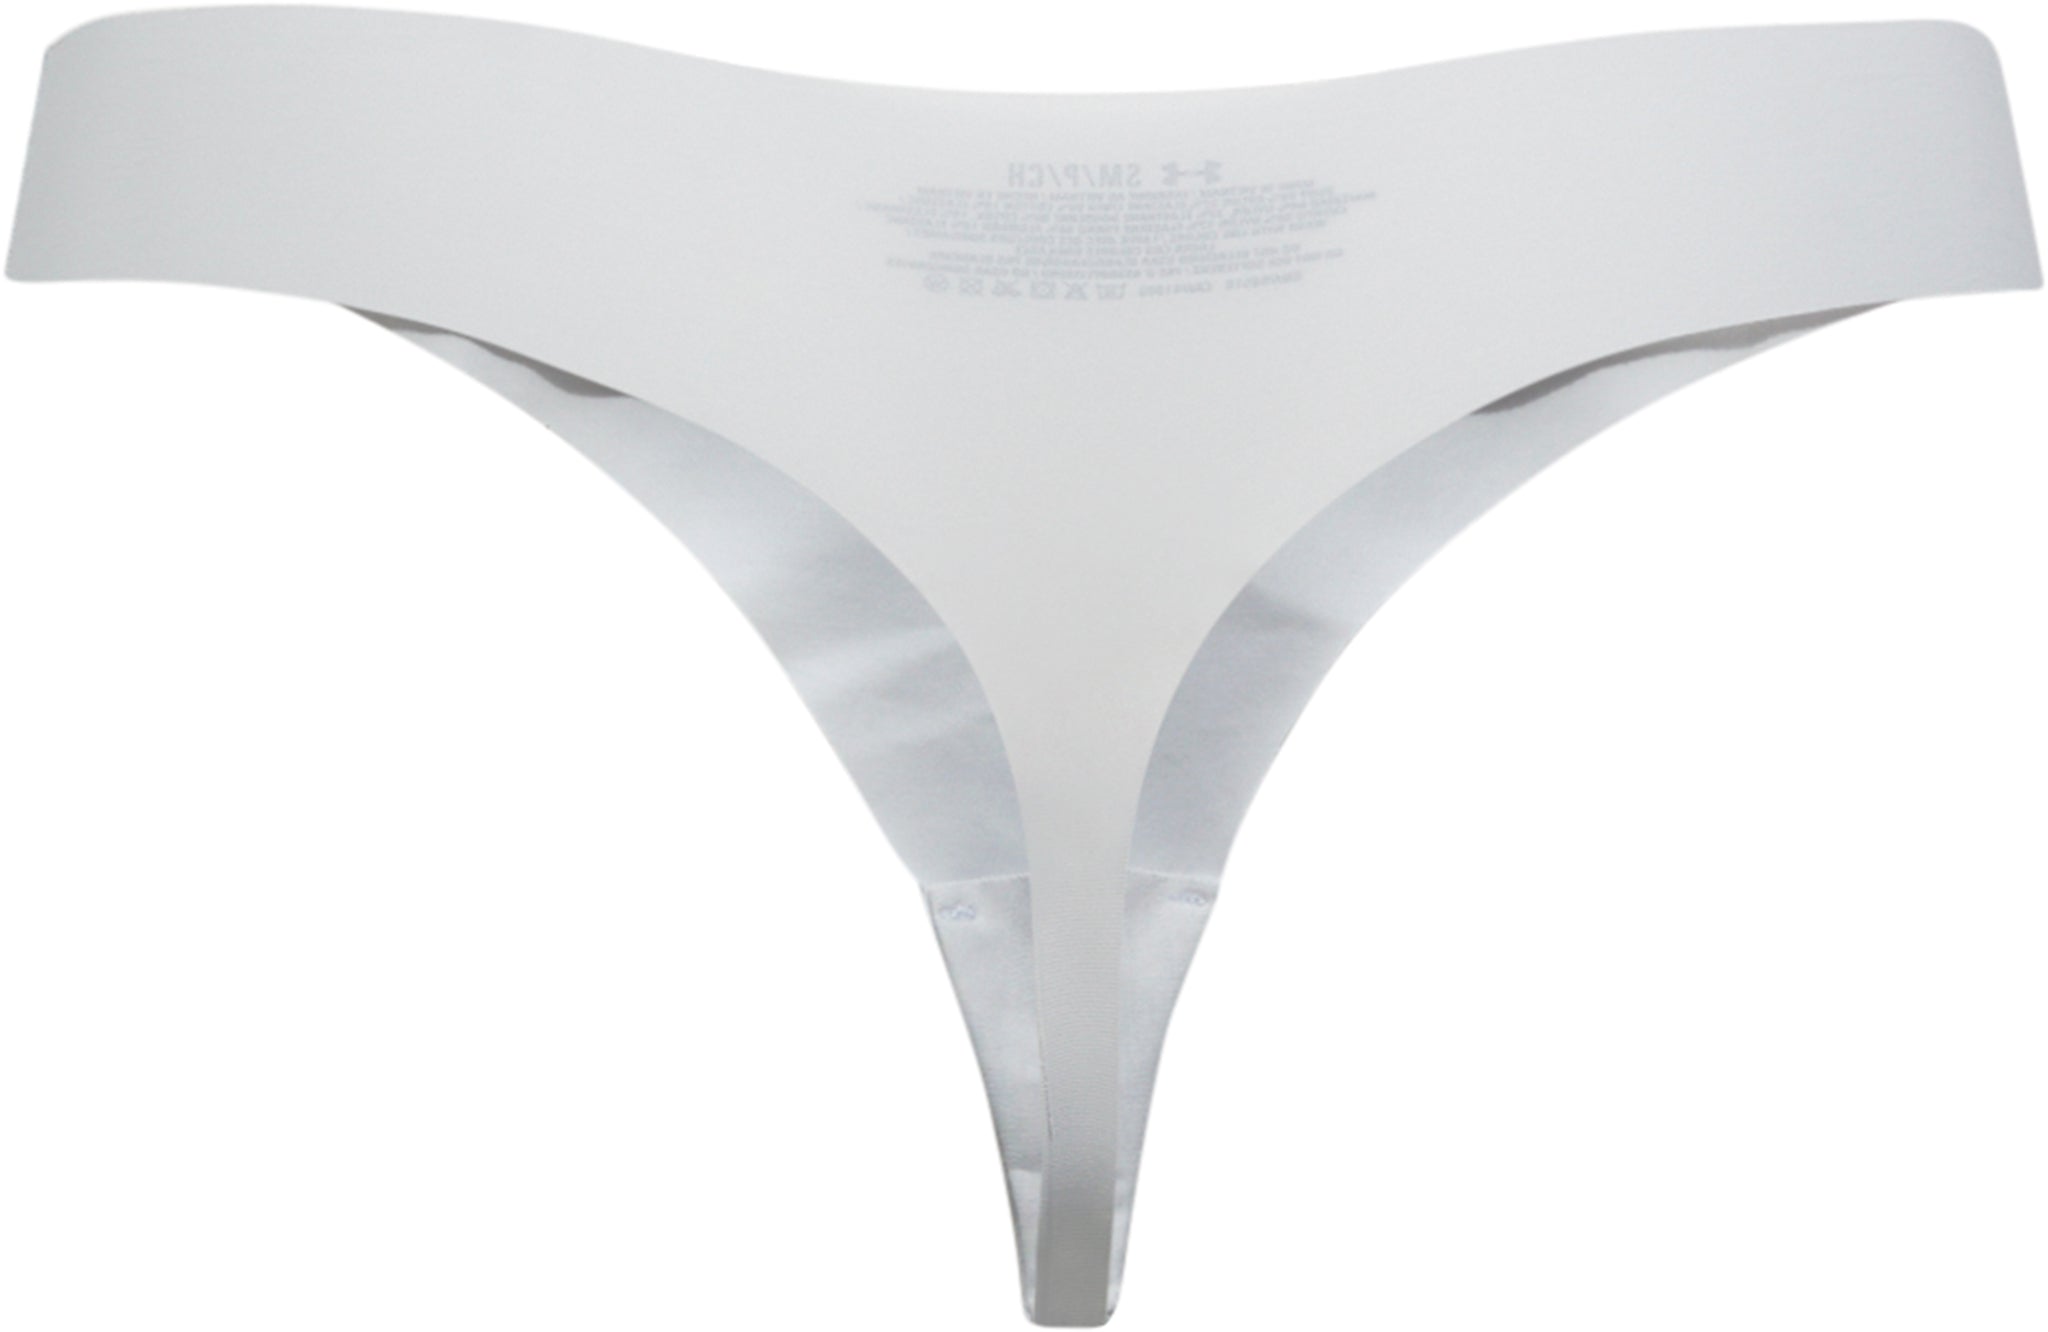 Under Armour + Pure Stretch Thong